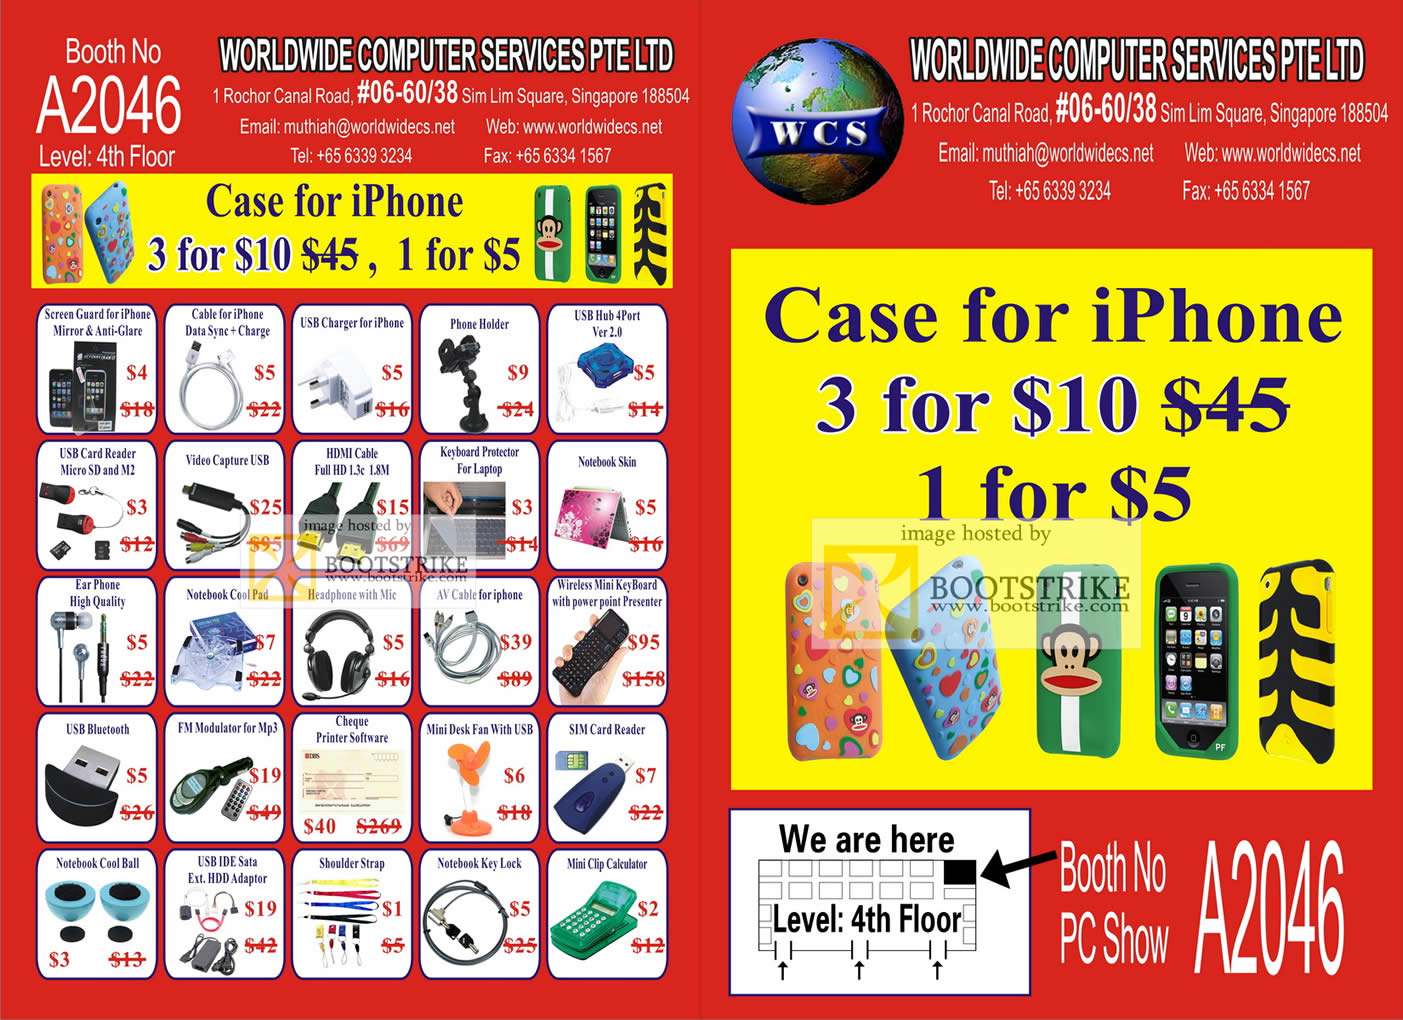 PC Show 2010 price list image brochure of Worldwide Computer Accessories Cable IPhone Case Card Reader USB HDMI Video Capture